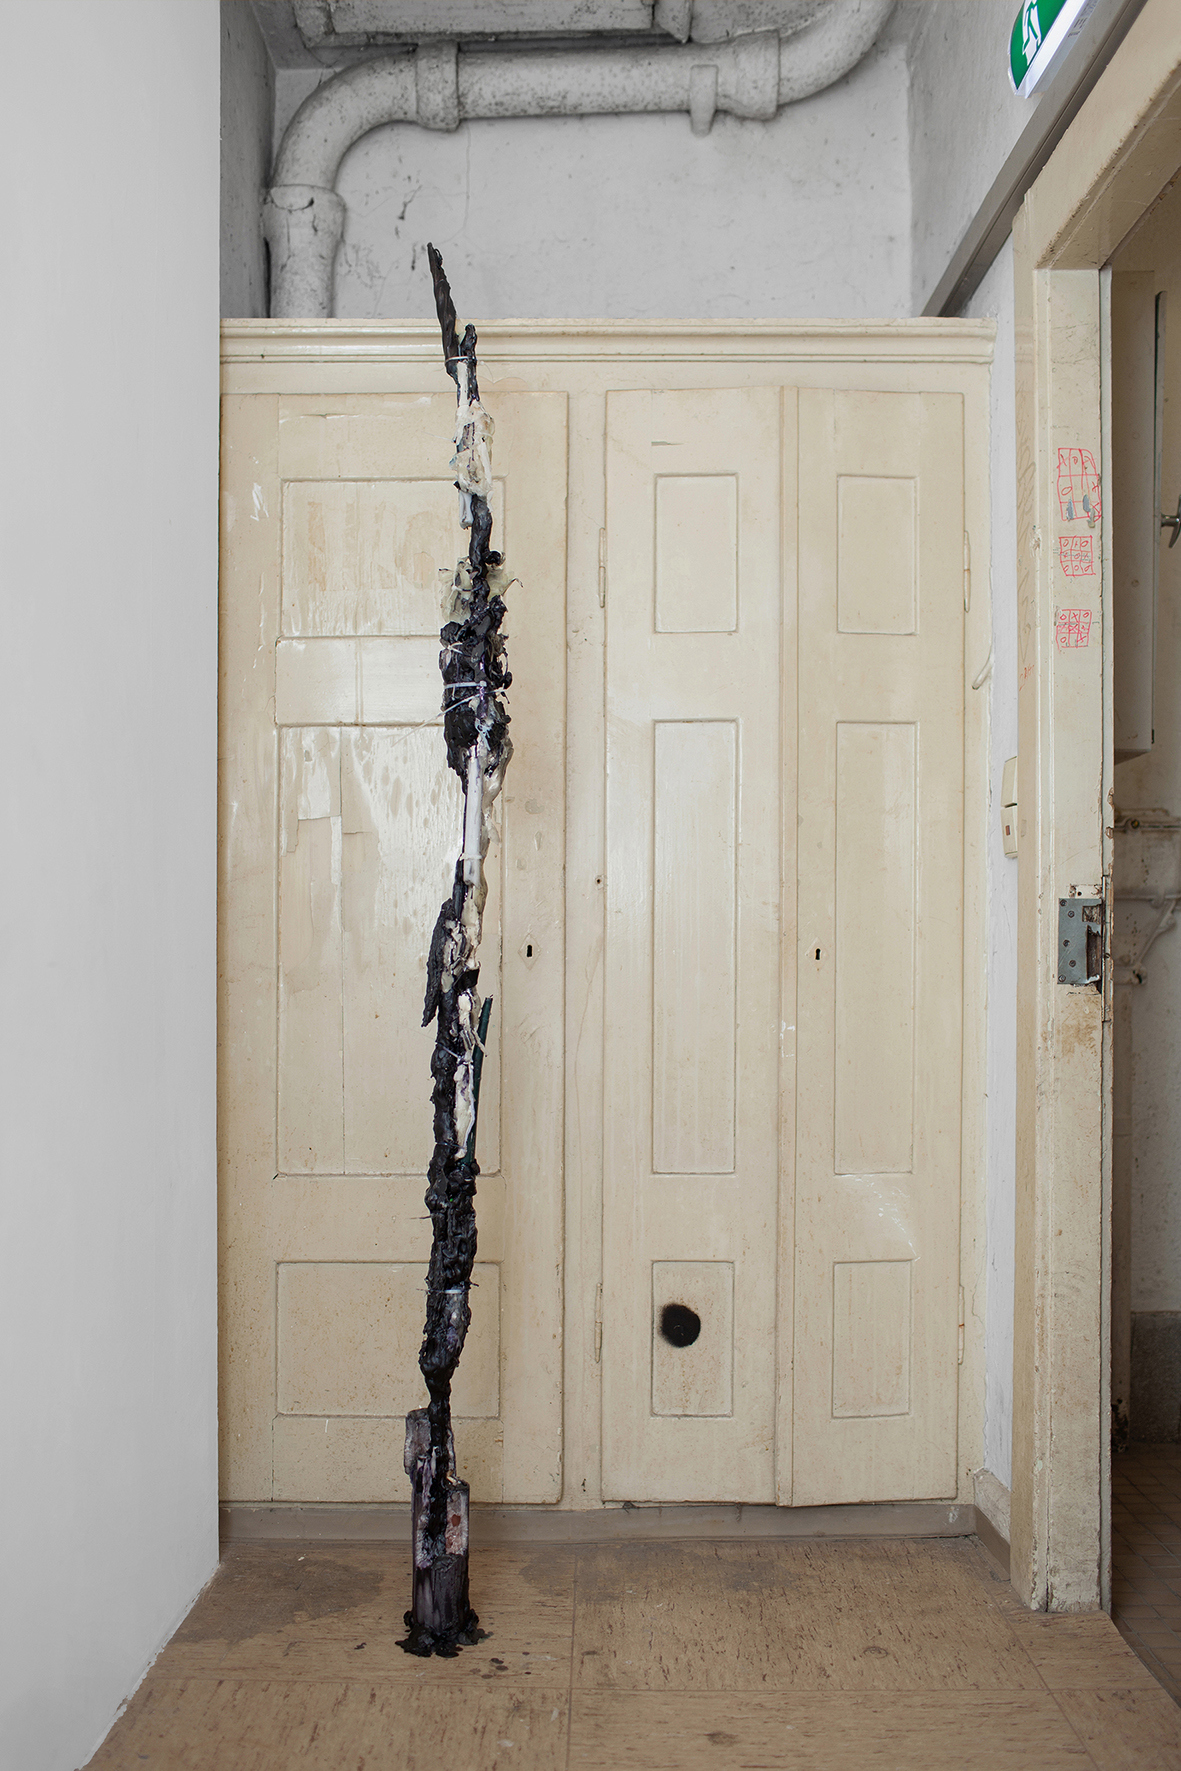 Intention Ghosts (retitled), 2021/24, series, candle remnants, wax, armatures, various materials, dimensions variable